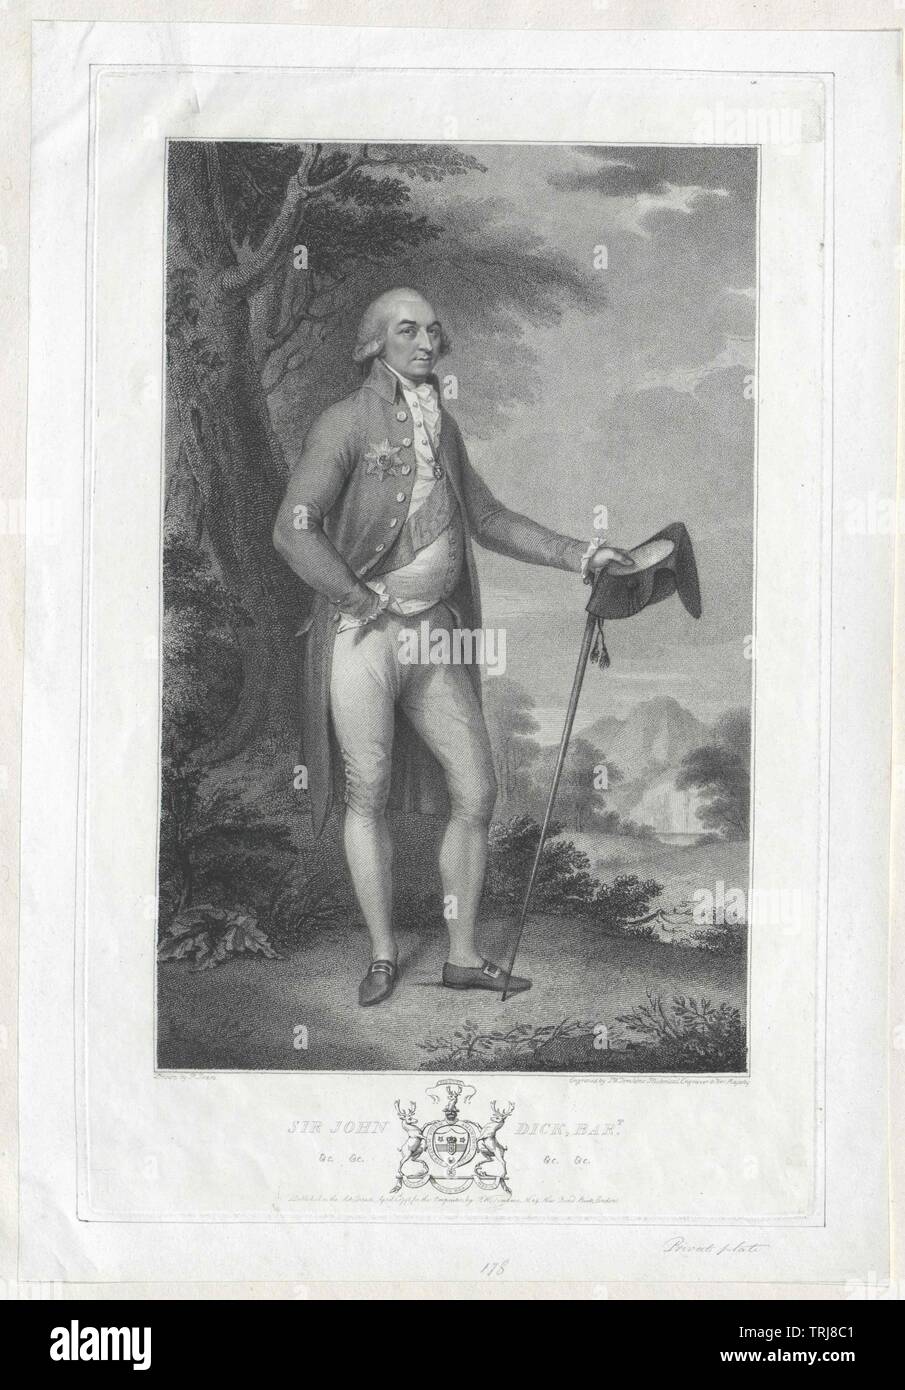 Dick, Sir John baronet, Additional-Rights - Clearance-Info - Not-Available Stockfoto